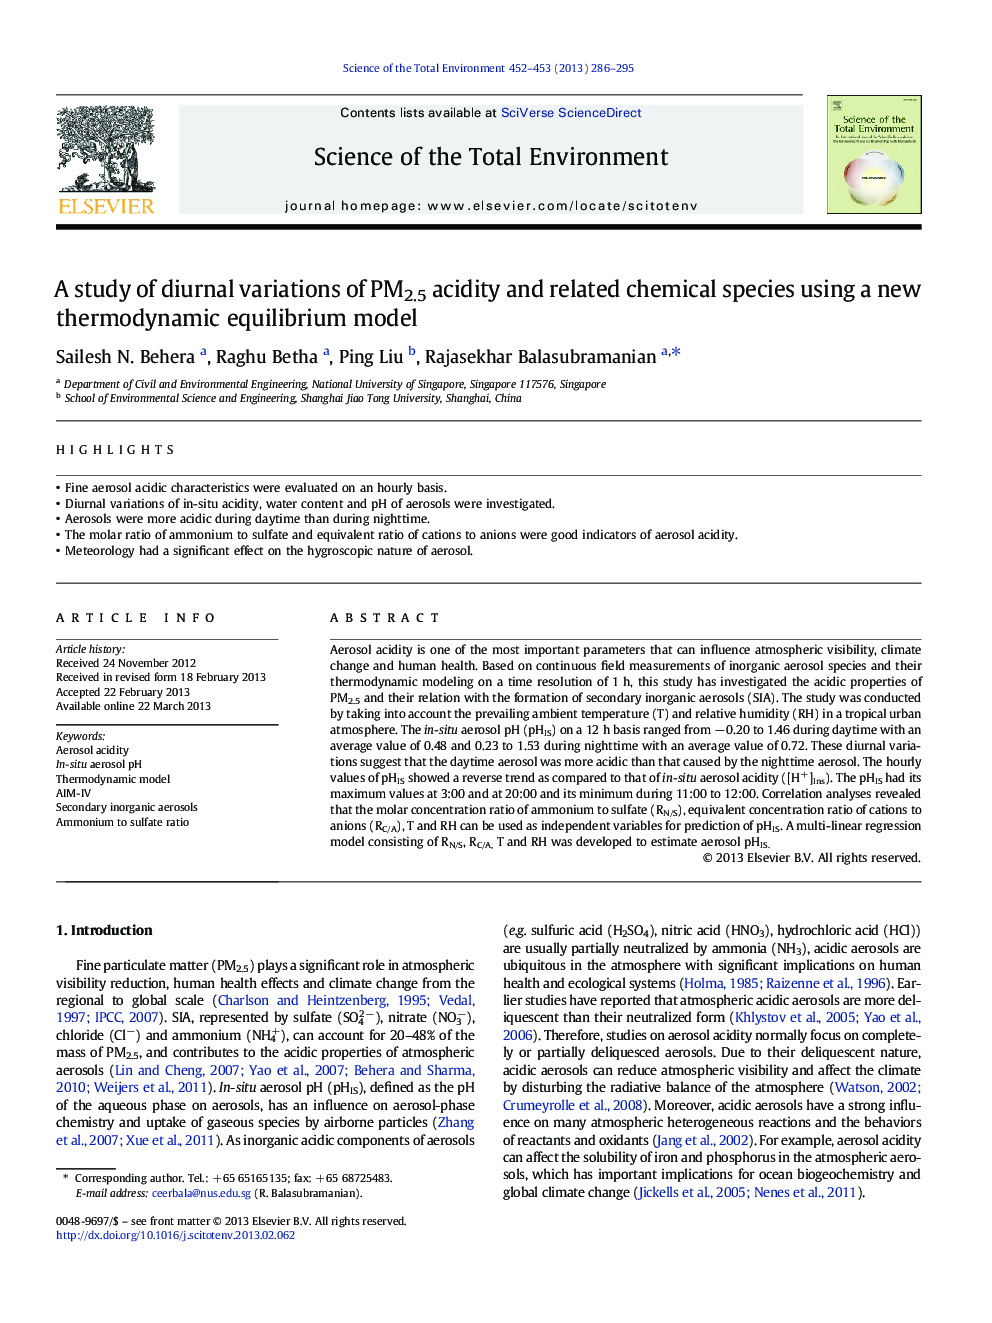 A study of diurnal variations of PM2.5 acidity and related chemical species using a new thermodynamic equilibrium model